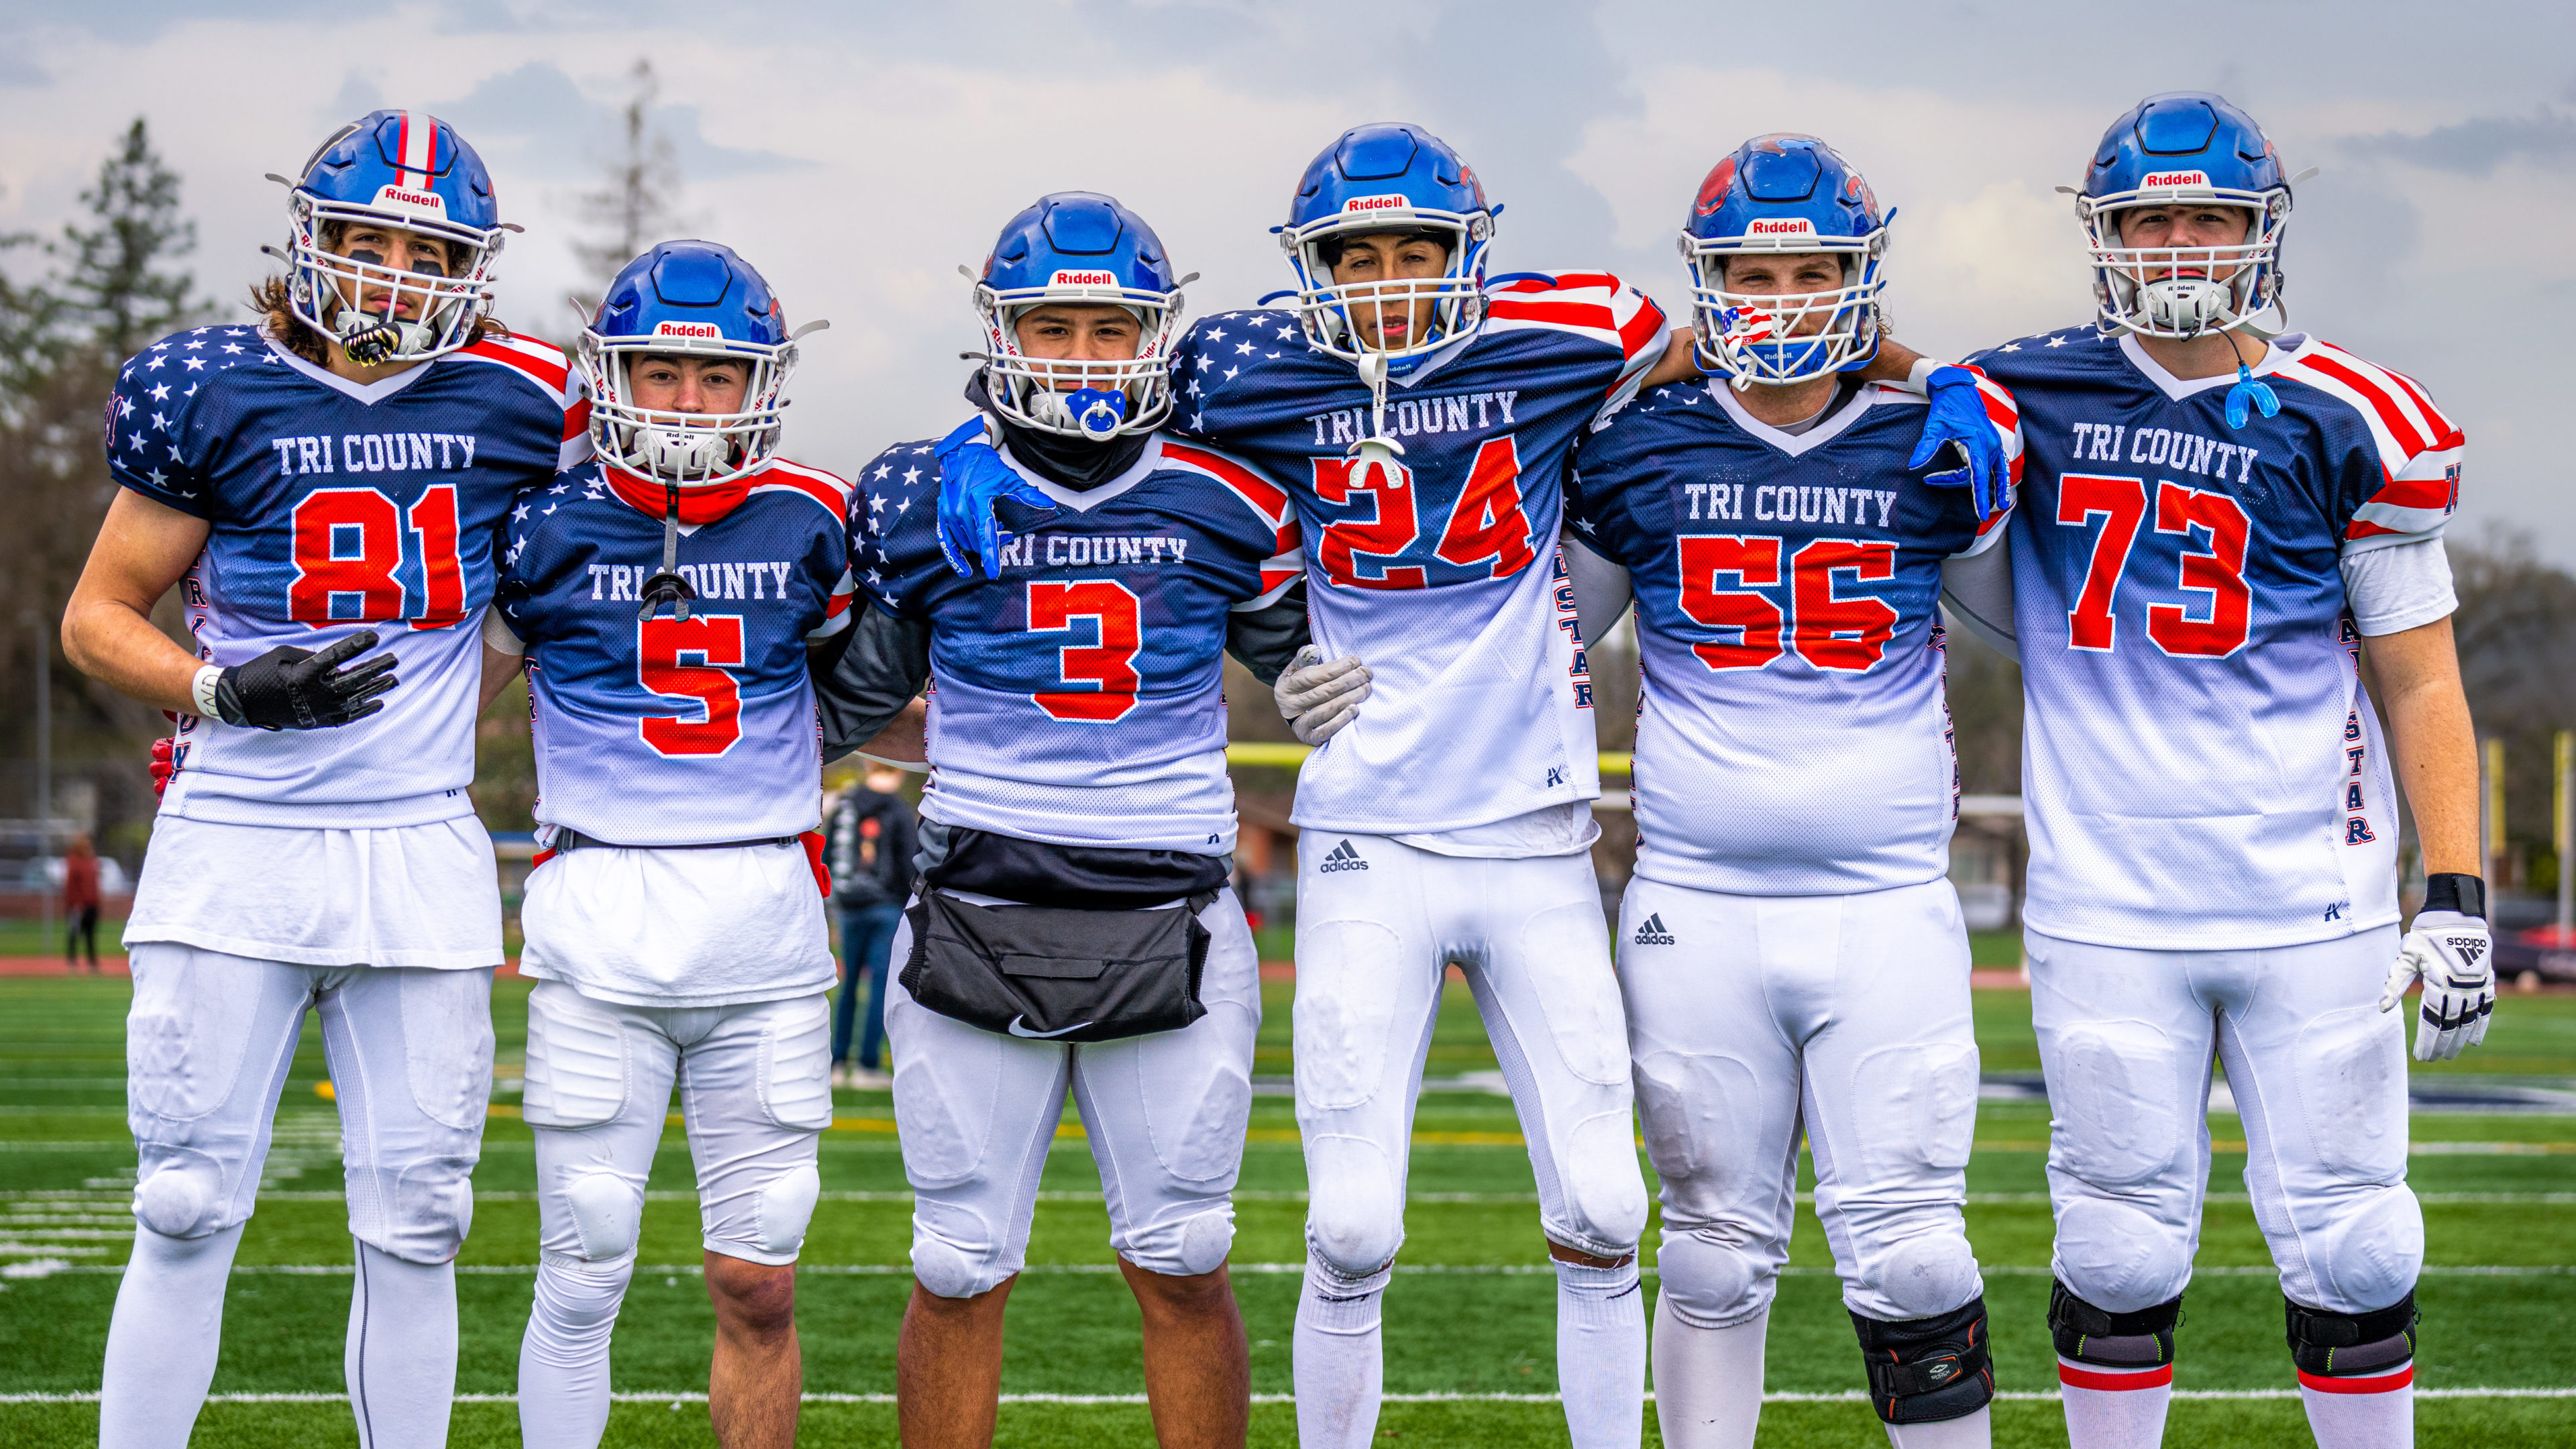 Analy football players shine in TriCounty AllStar game BVM Sports